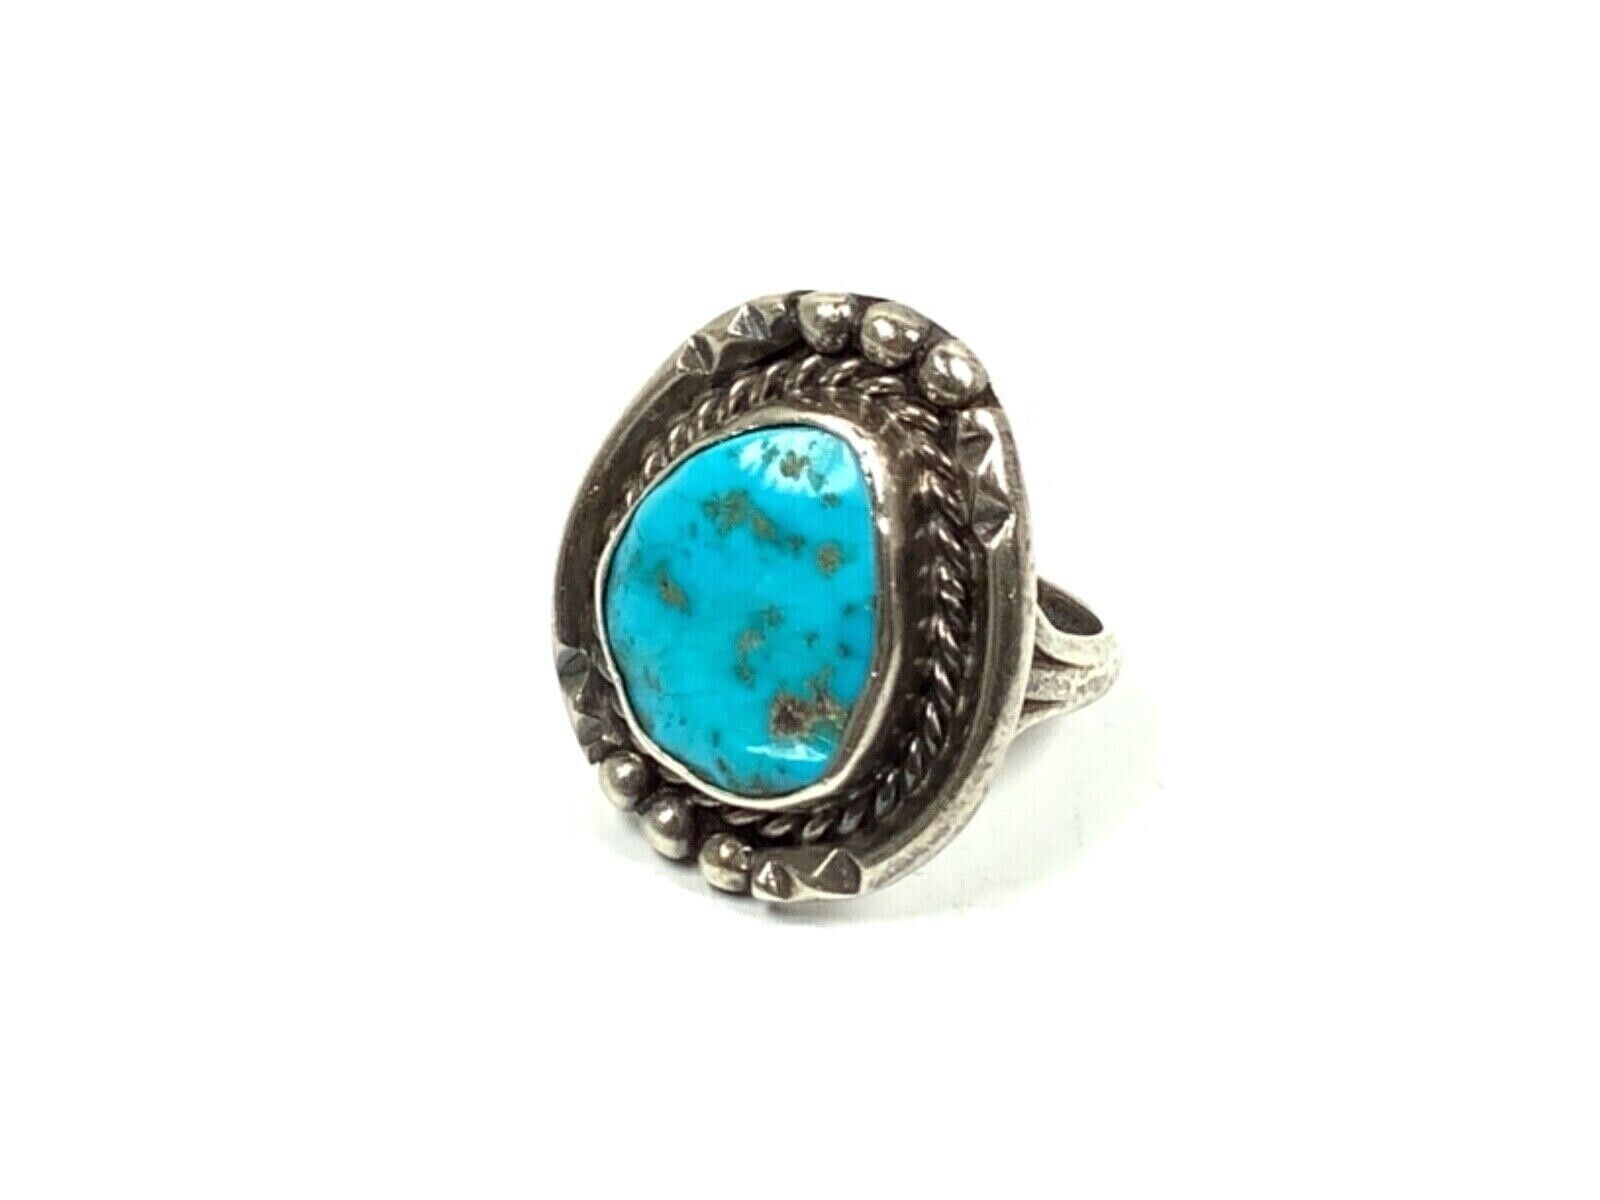 Thompson Platero Navajo Signed 925 Sterling Ring w/Bezel Set Blue Turquoise US 7